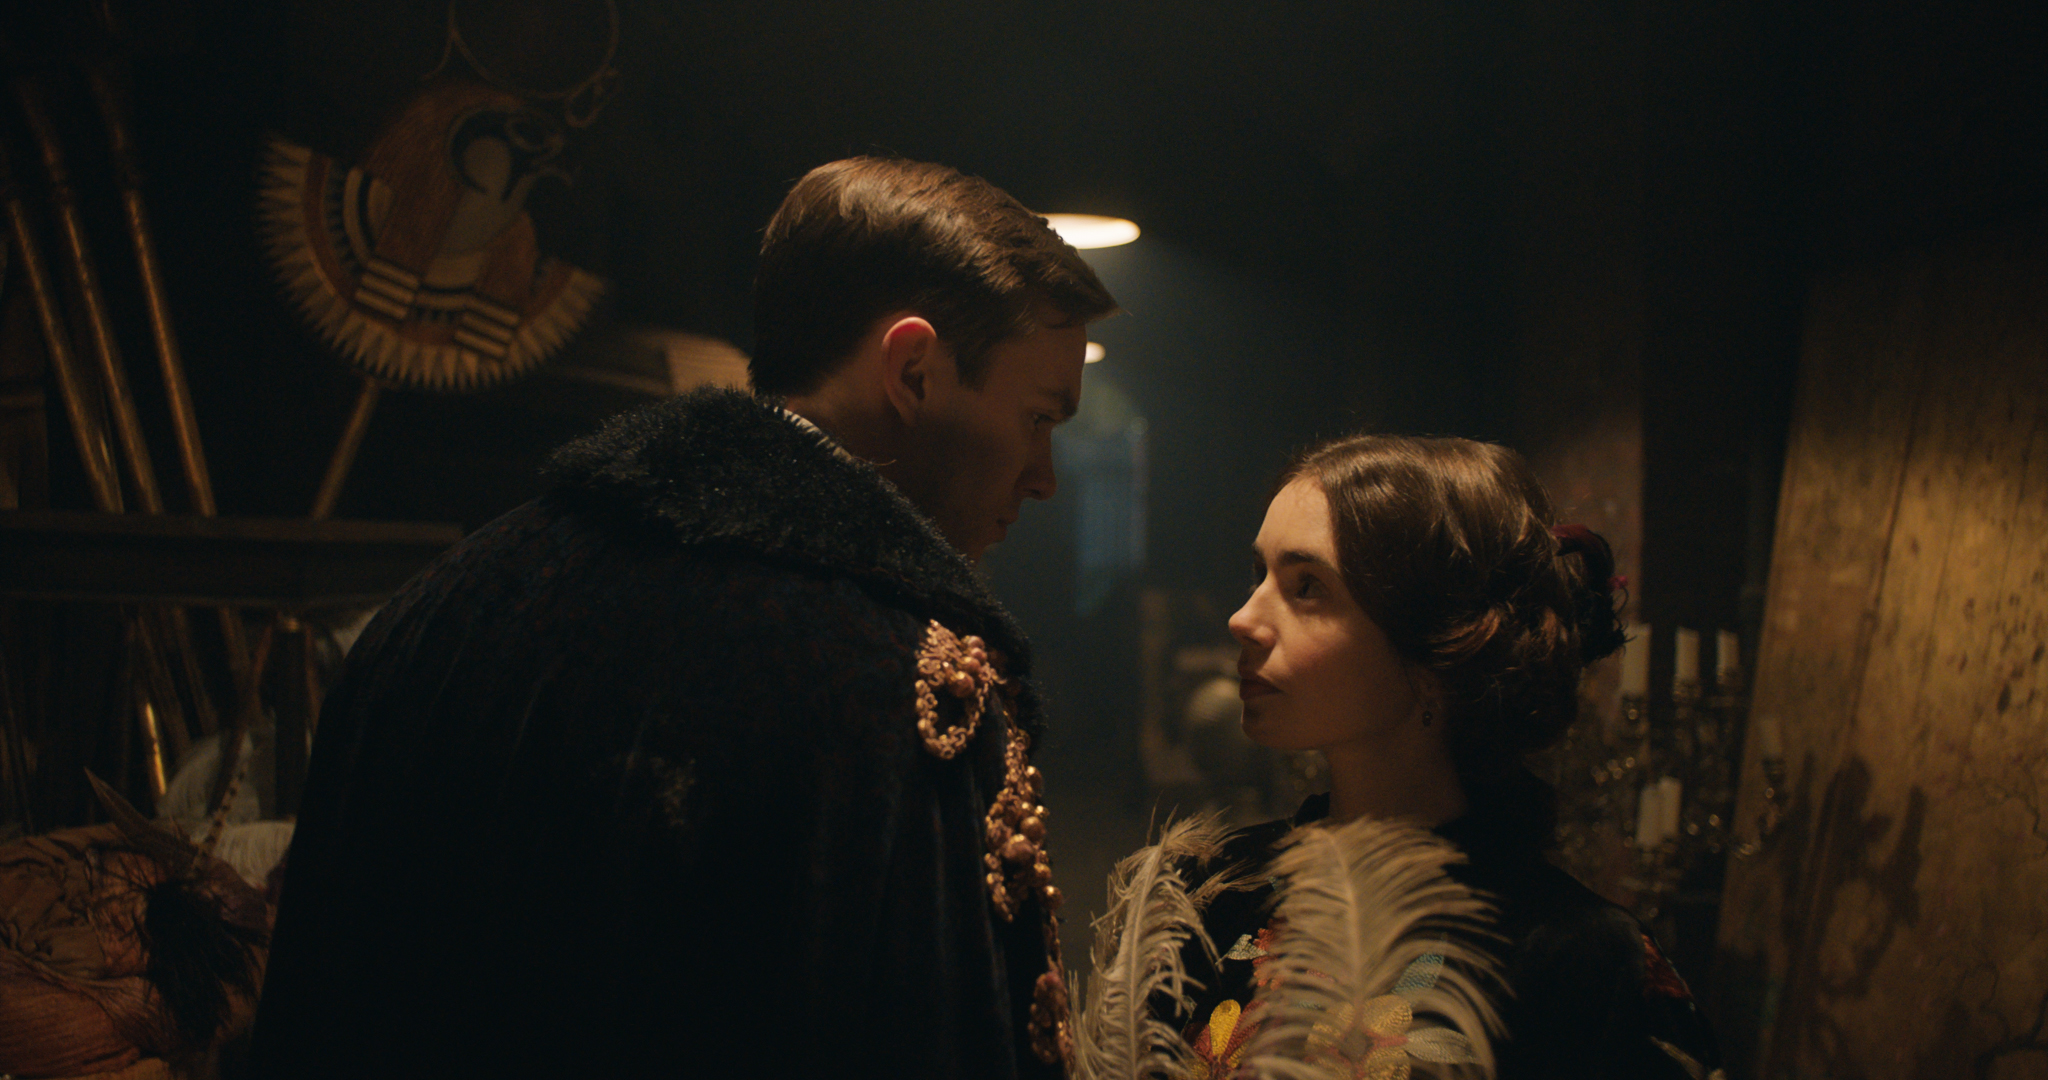 Nicholas Hoult and Lily Collins in the film TOLKIEN. Photo Courtesy of Fox Searchlight Pictures. © 2019 Twentieth Century Fox Film Corporation All Rights Reserved